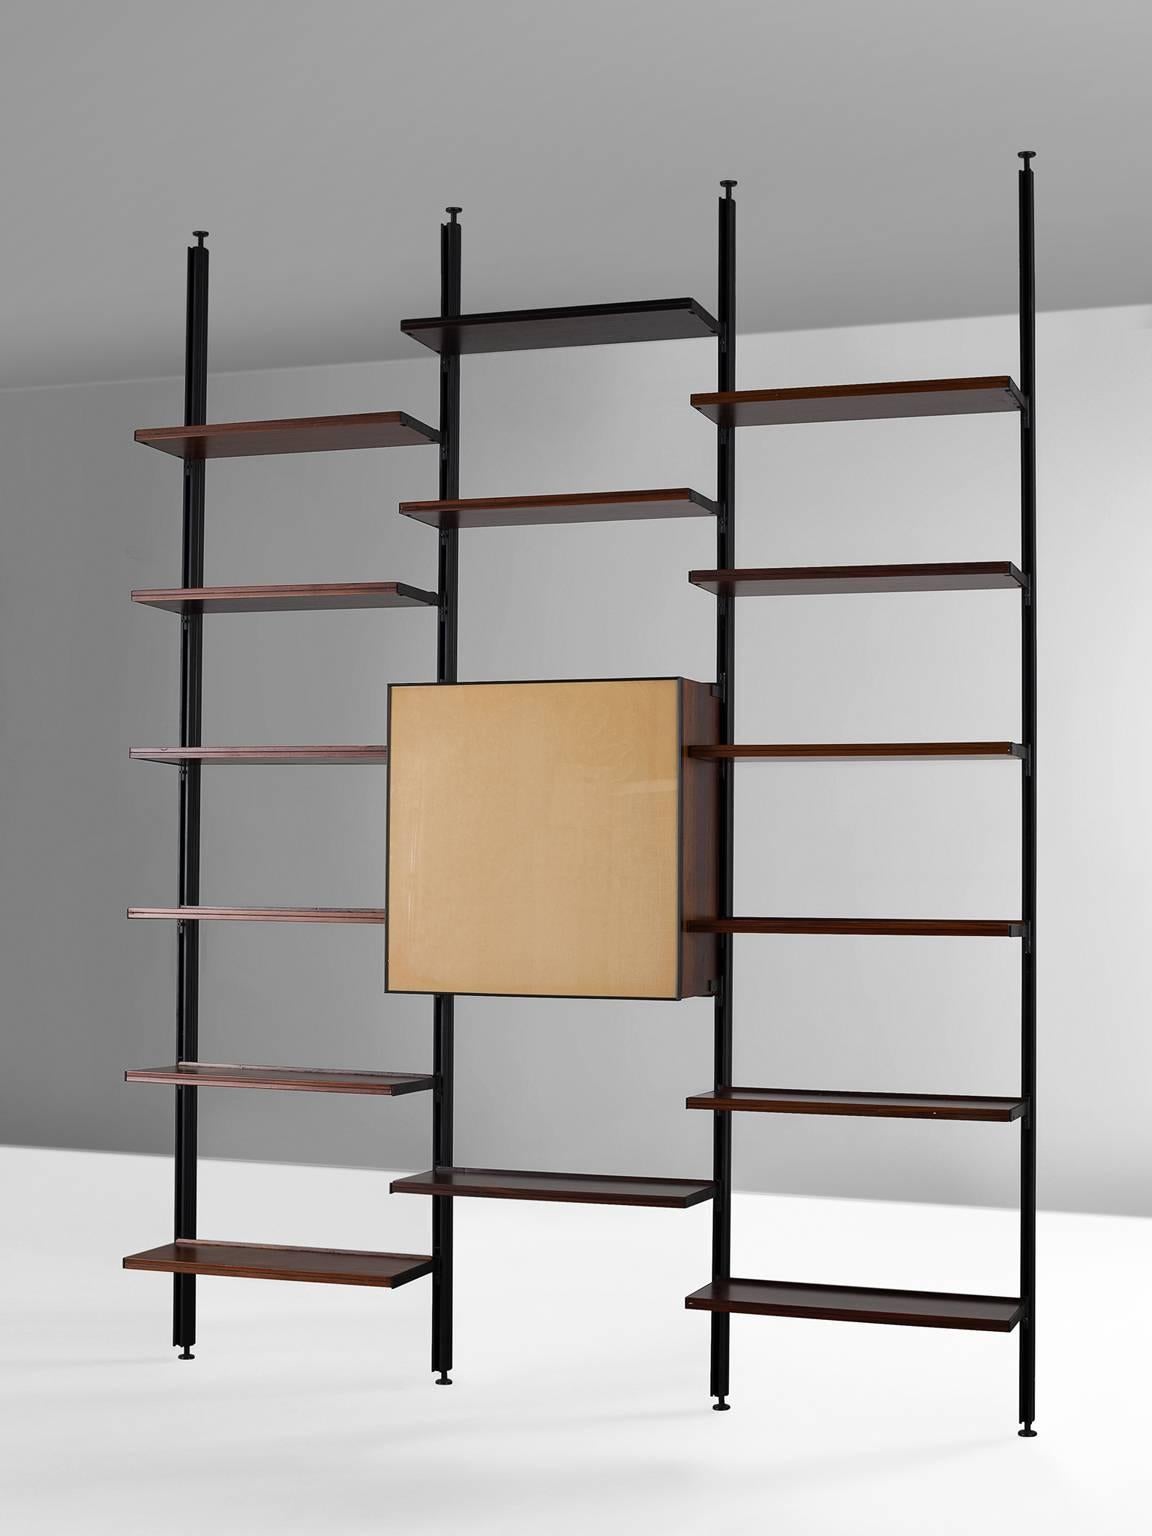 Bookcase, in metal and rosewood, by Osvaldo Borsani for Tecno, Italy, 1950s.

This E22 wall unit by Borsani for Tecno features 15 shelves and one cabinet. According to Osvaldo Borsani the home needs to be orderly, comfortable and easily